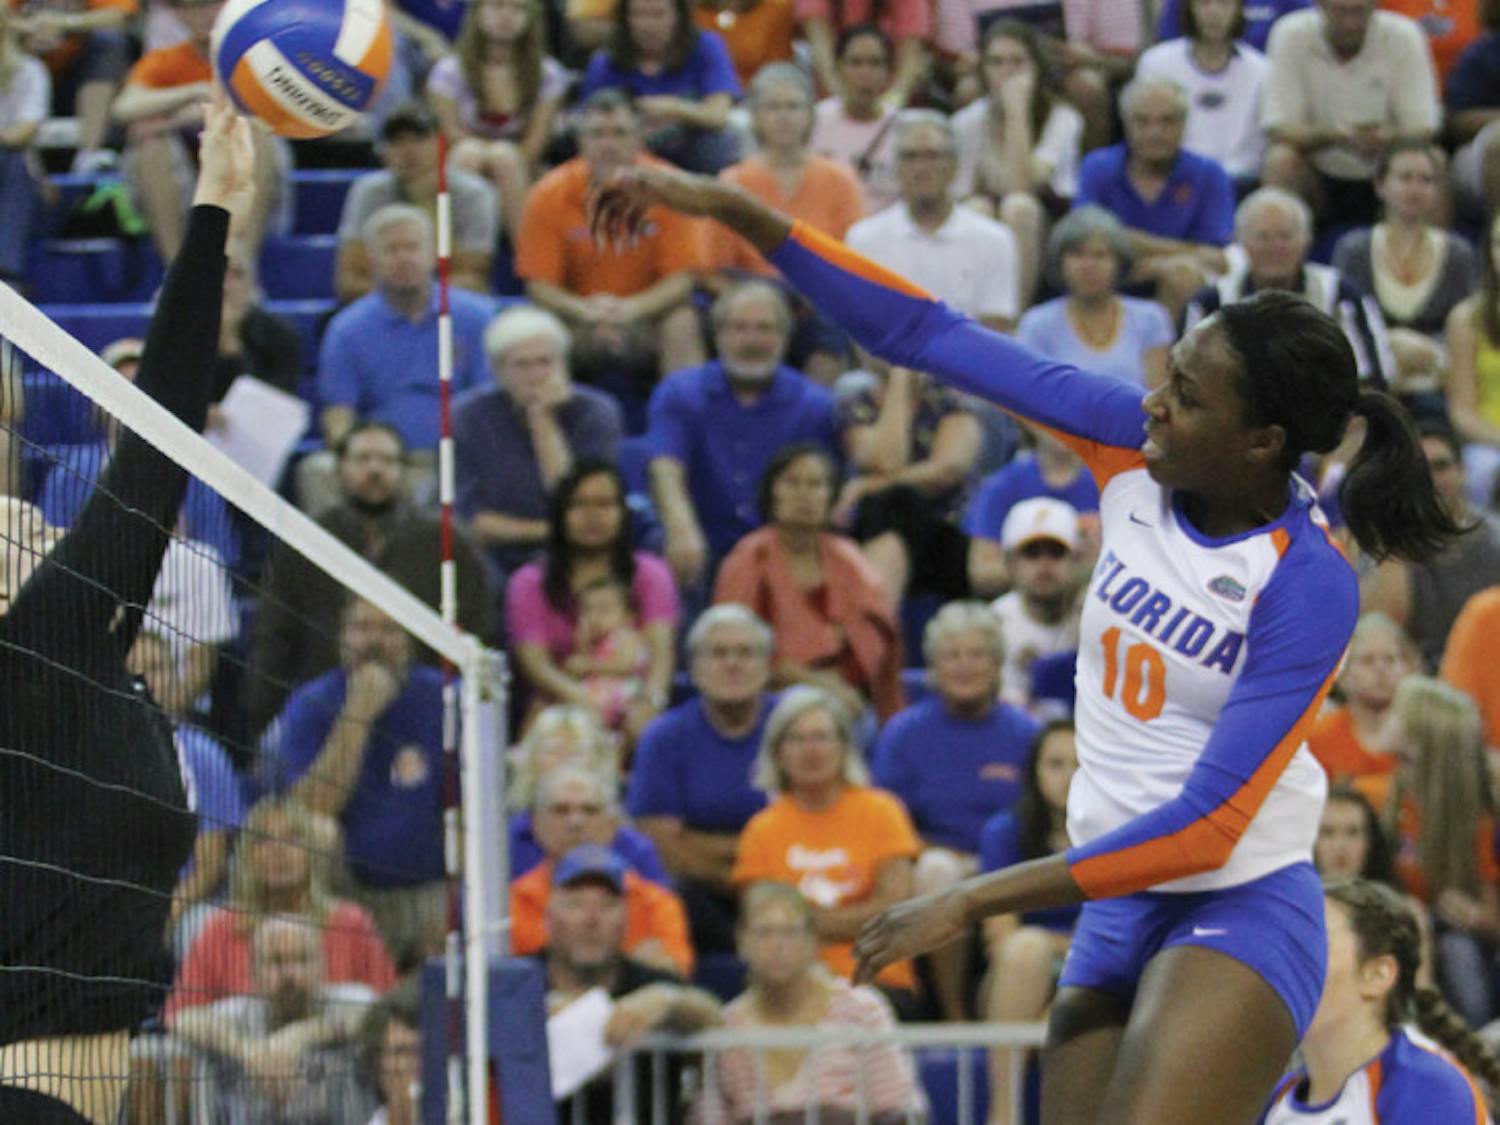 Junior middle-blocker Chloe Mann attacks the Missouri defense. Florida won the match 3-0 at the Stephen C. O'Connell Center on Friday night.